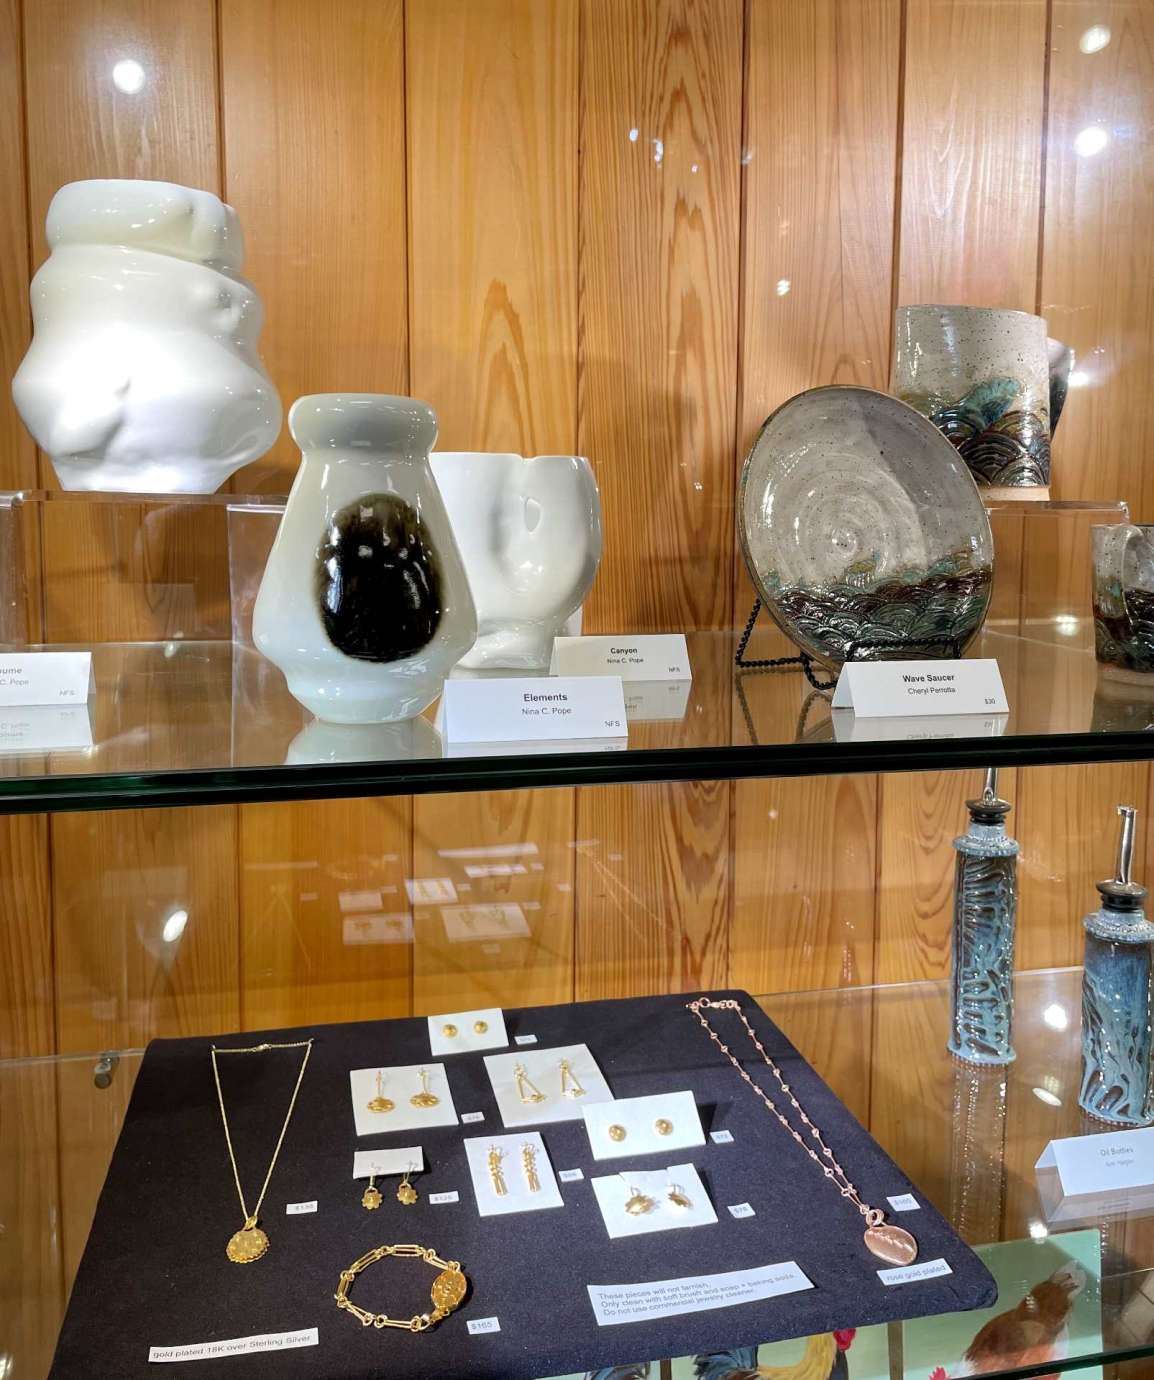 A display case filled with handmade pottery and jewelry pieces